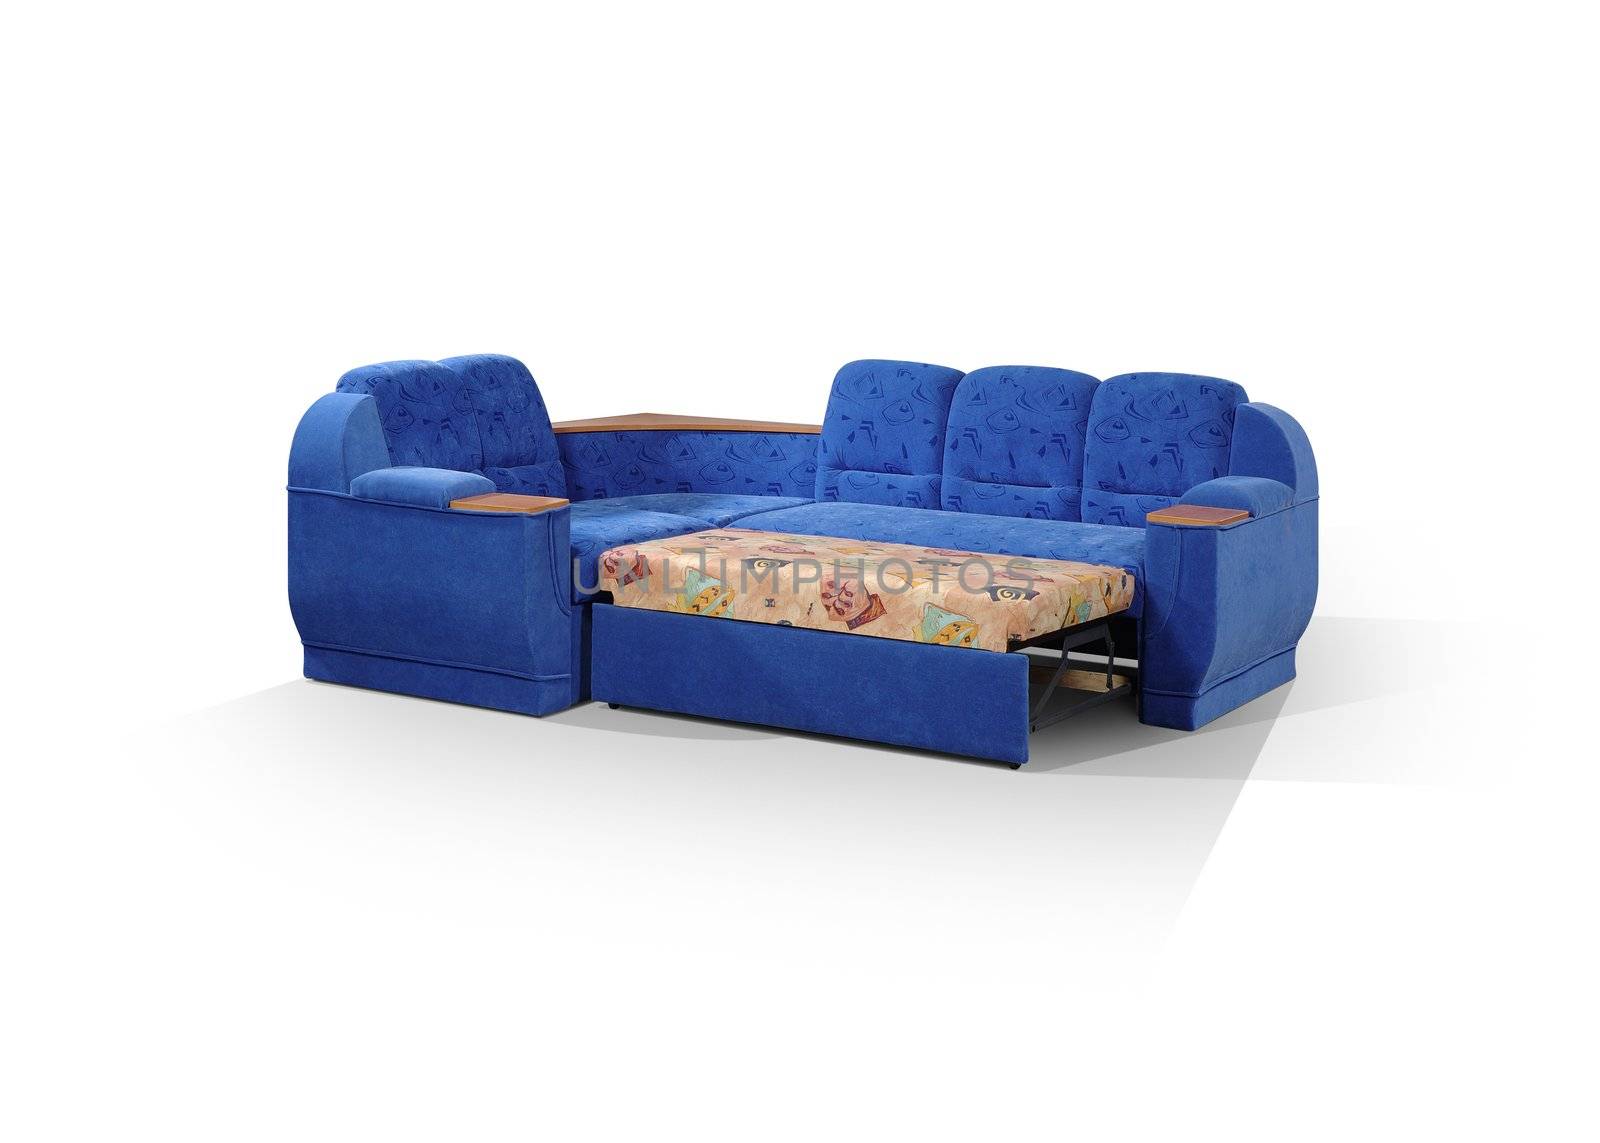 angular sofa of dark blue color, decomposed in a bed